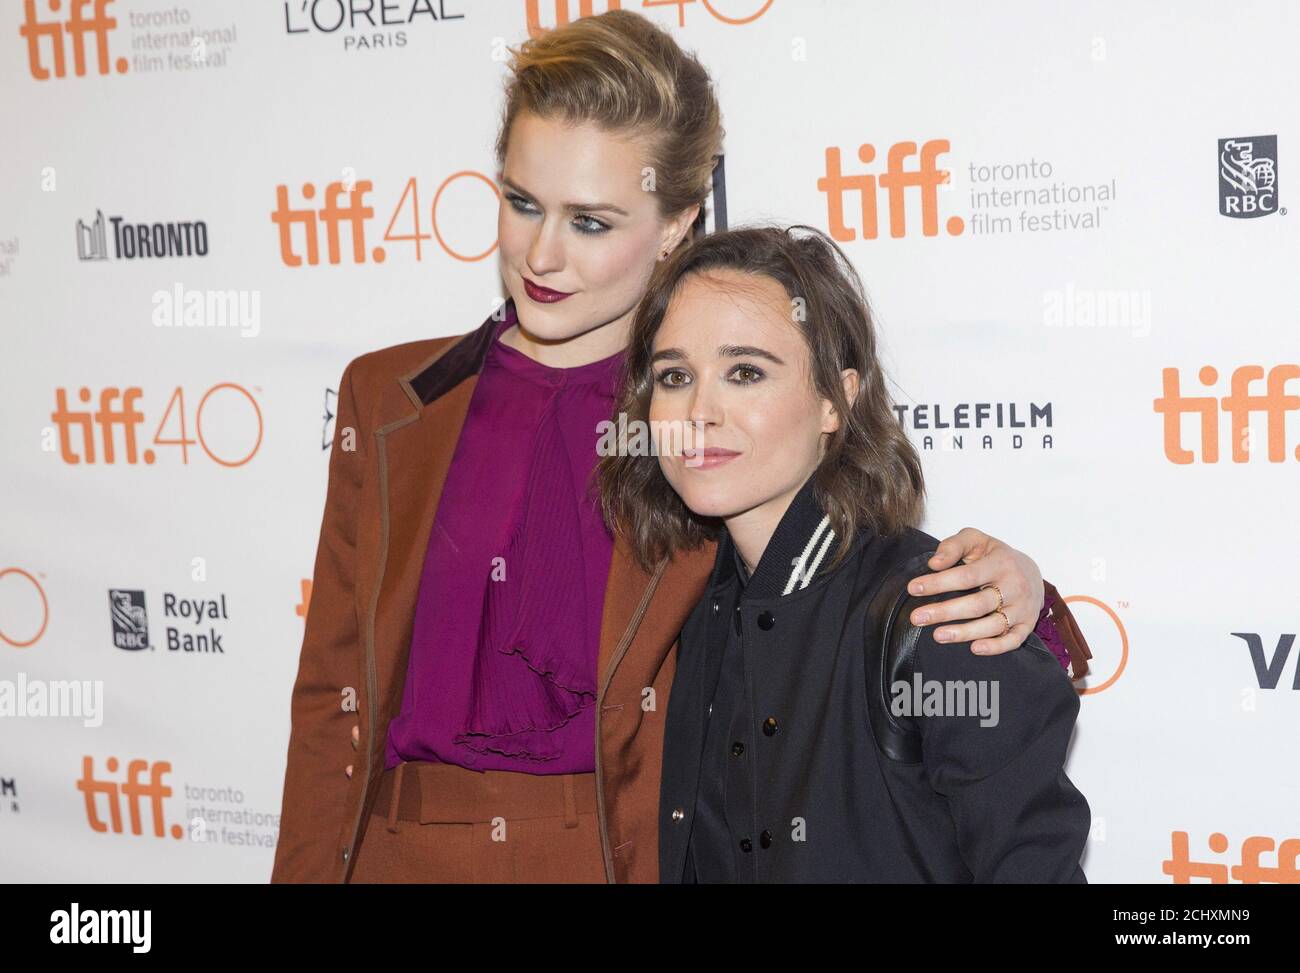 Ellen Page arrives with Evan Rachel Wood (L) on the red carpet for the film 'Into the Forest' during the 40th Toronto International Film Festival in Toronto, Canada, September 12, 2015. TIFF runs from September 10-20.   REUTERS/Mark Blinch Stock Photo